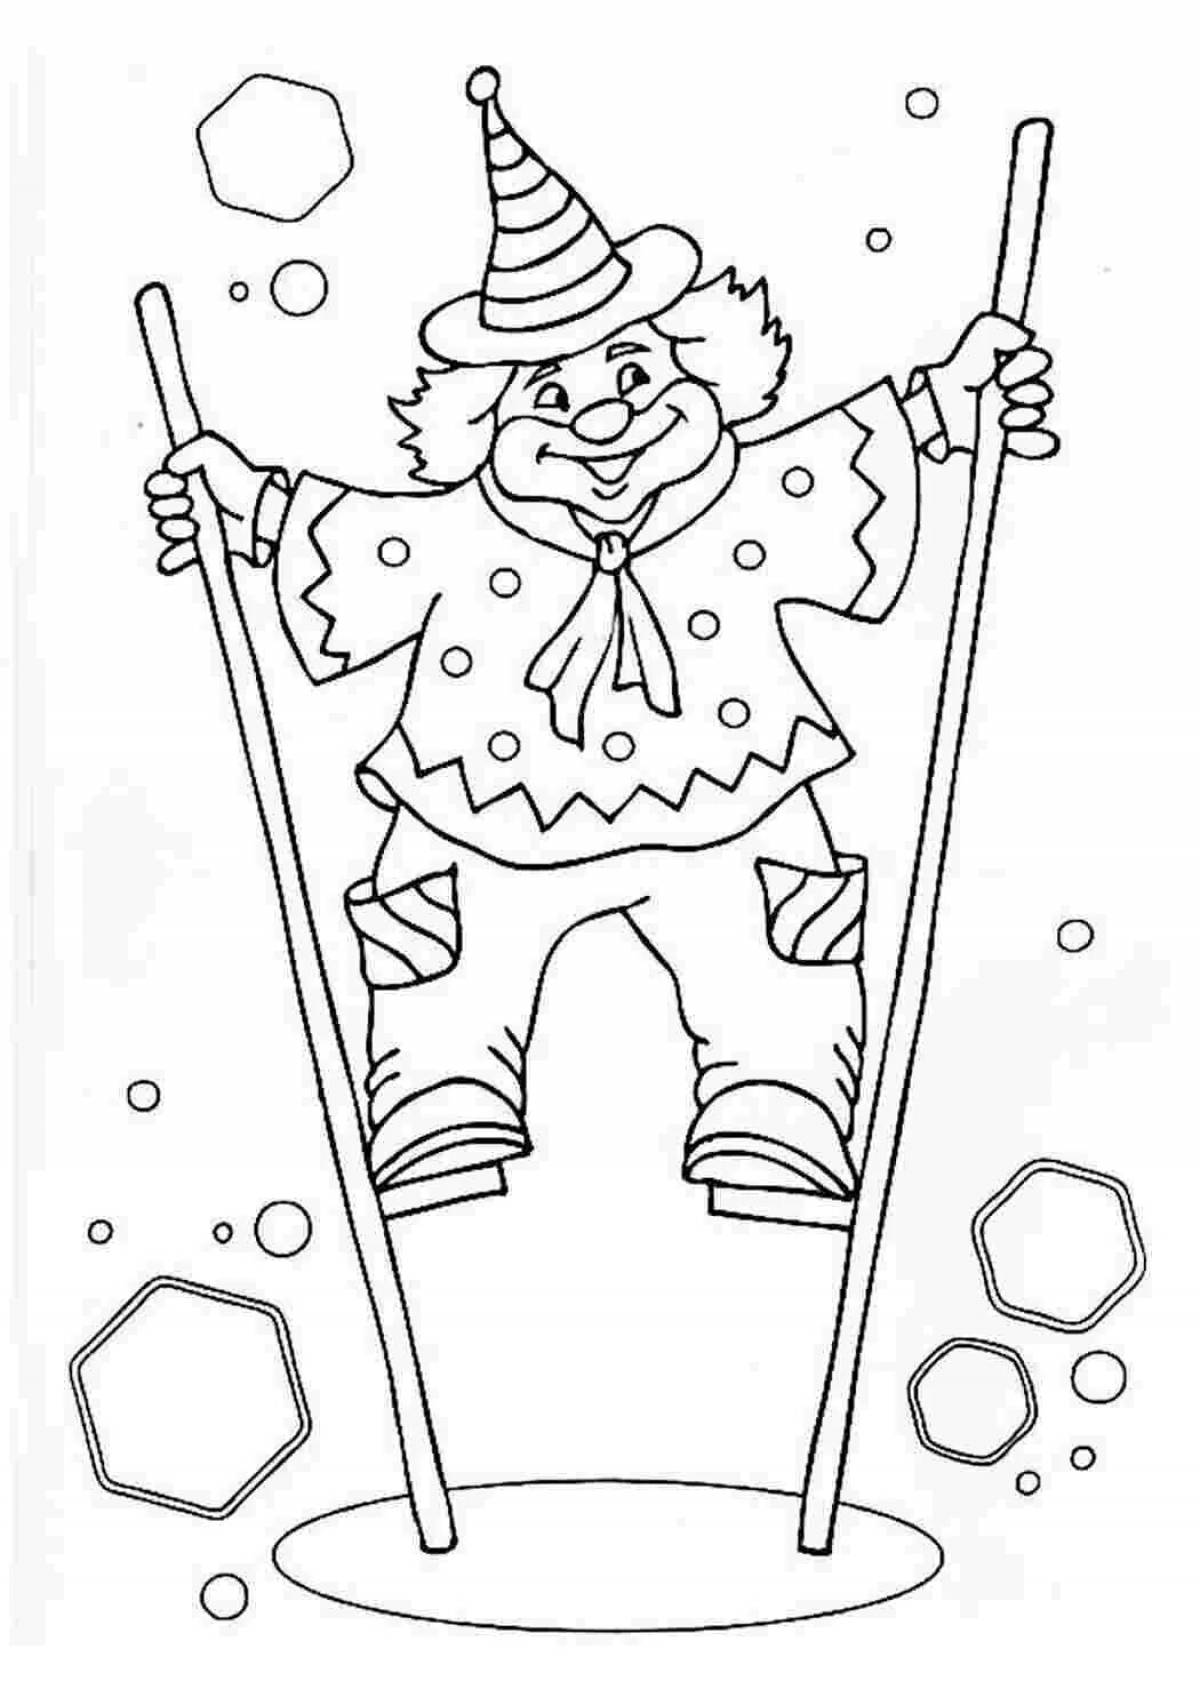 Amazing jester coloring page for kids